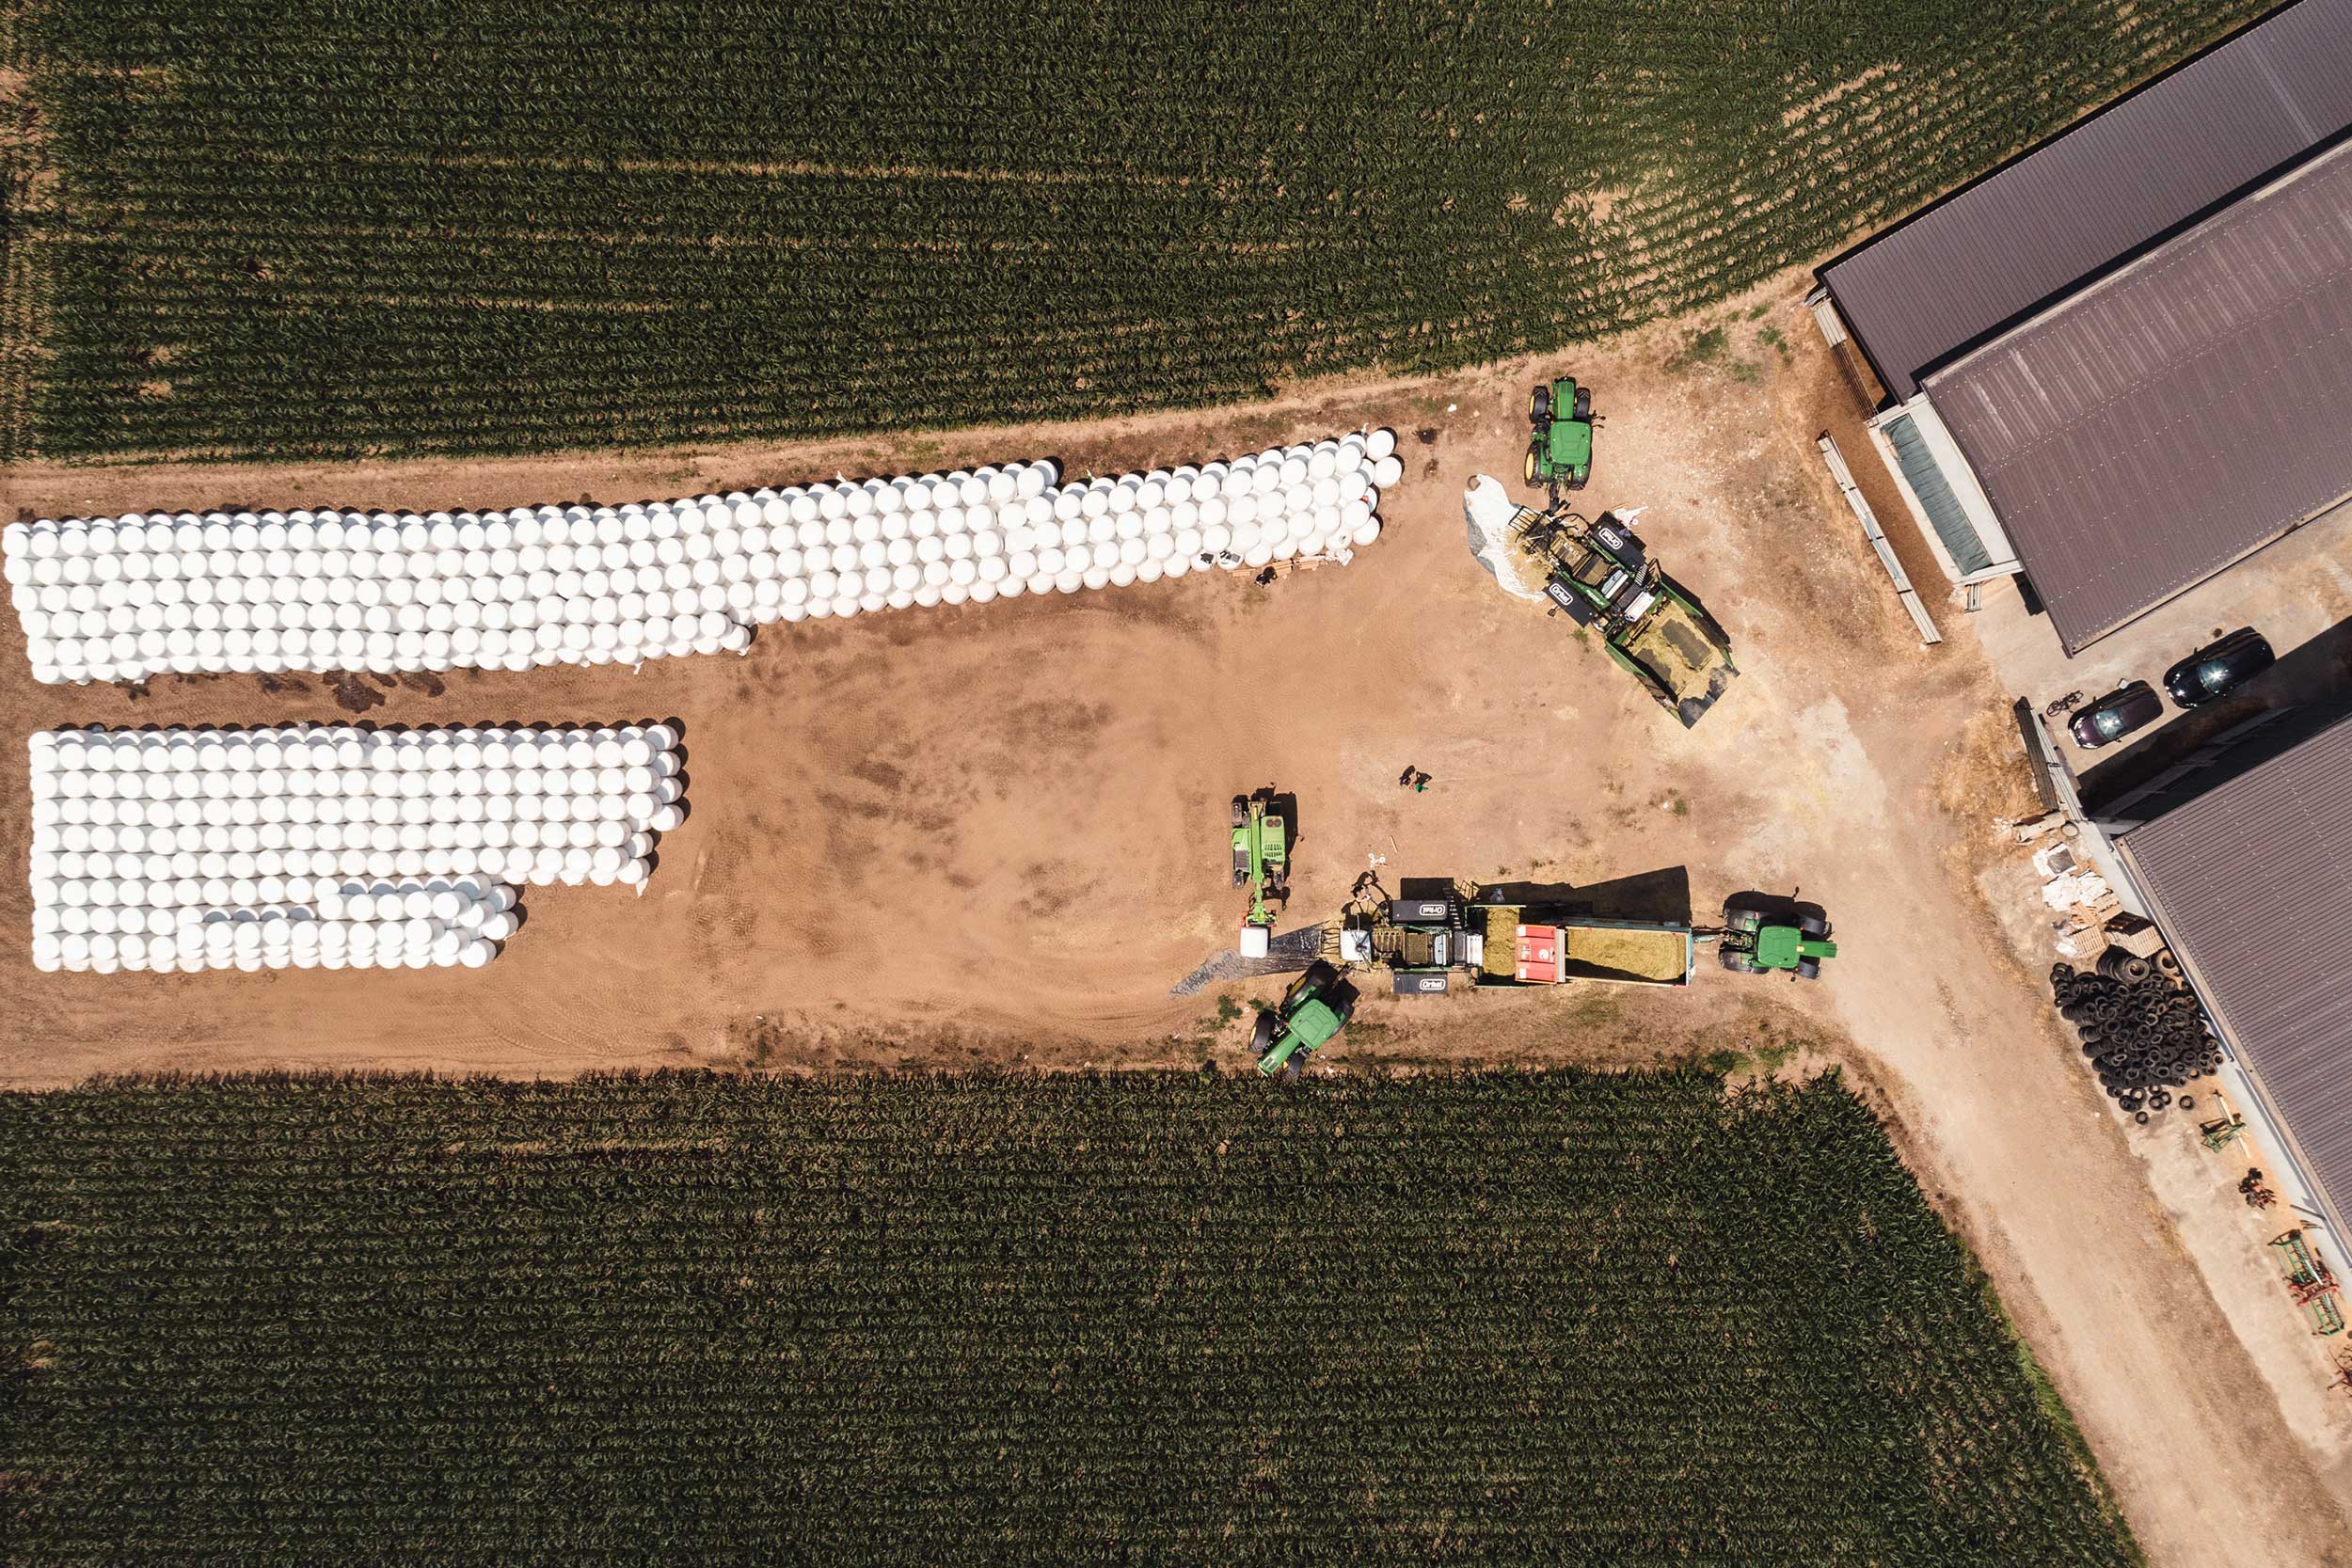 Maize field, stacks of round bales and Orkel compactors seen from above